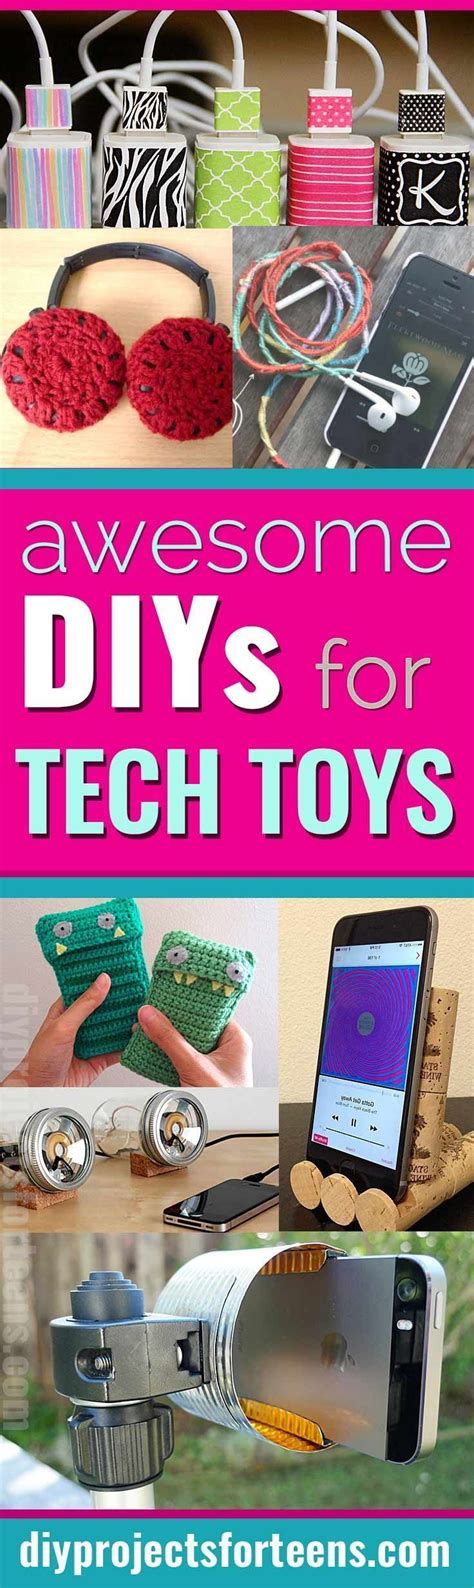 35 Awesome Diys For Your Tech Toys Diy Projects For Teens Diy For